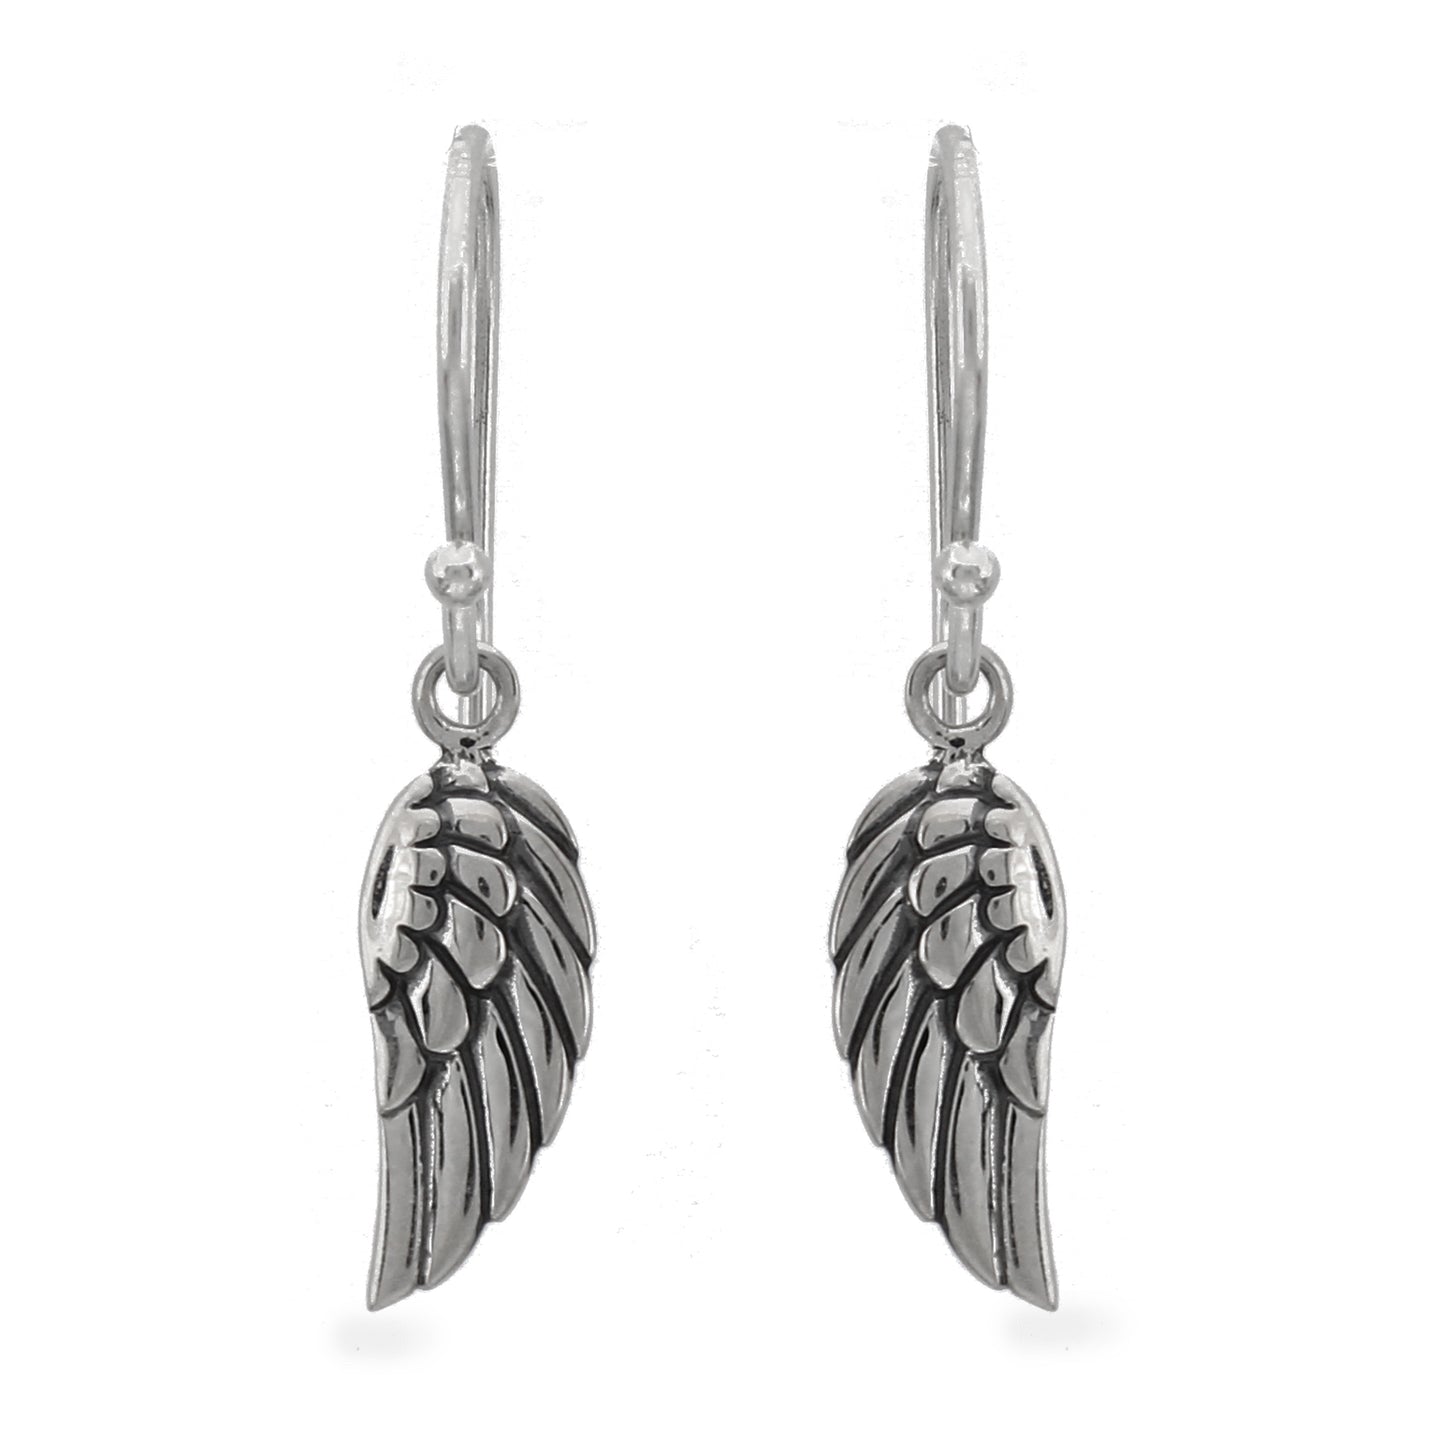 11 11 Silver Earrings • Lightworker Jewelry Gifts • Make a Wish • Angel Wing Charm • 1111 Earrings • Guardian Angel • Spiritual Growth Encouragement Gifts for Women • Ascension Jewelry Gift